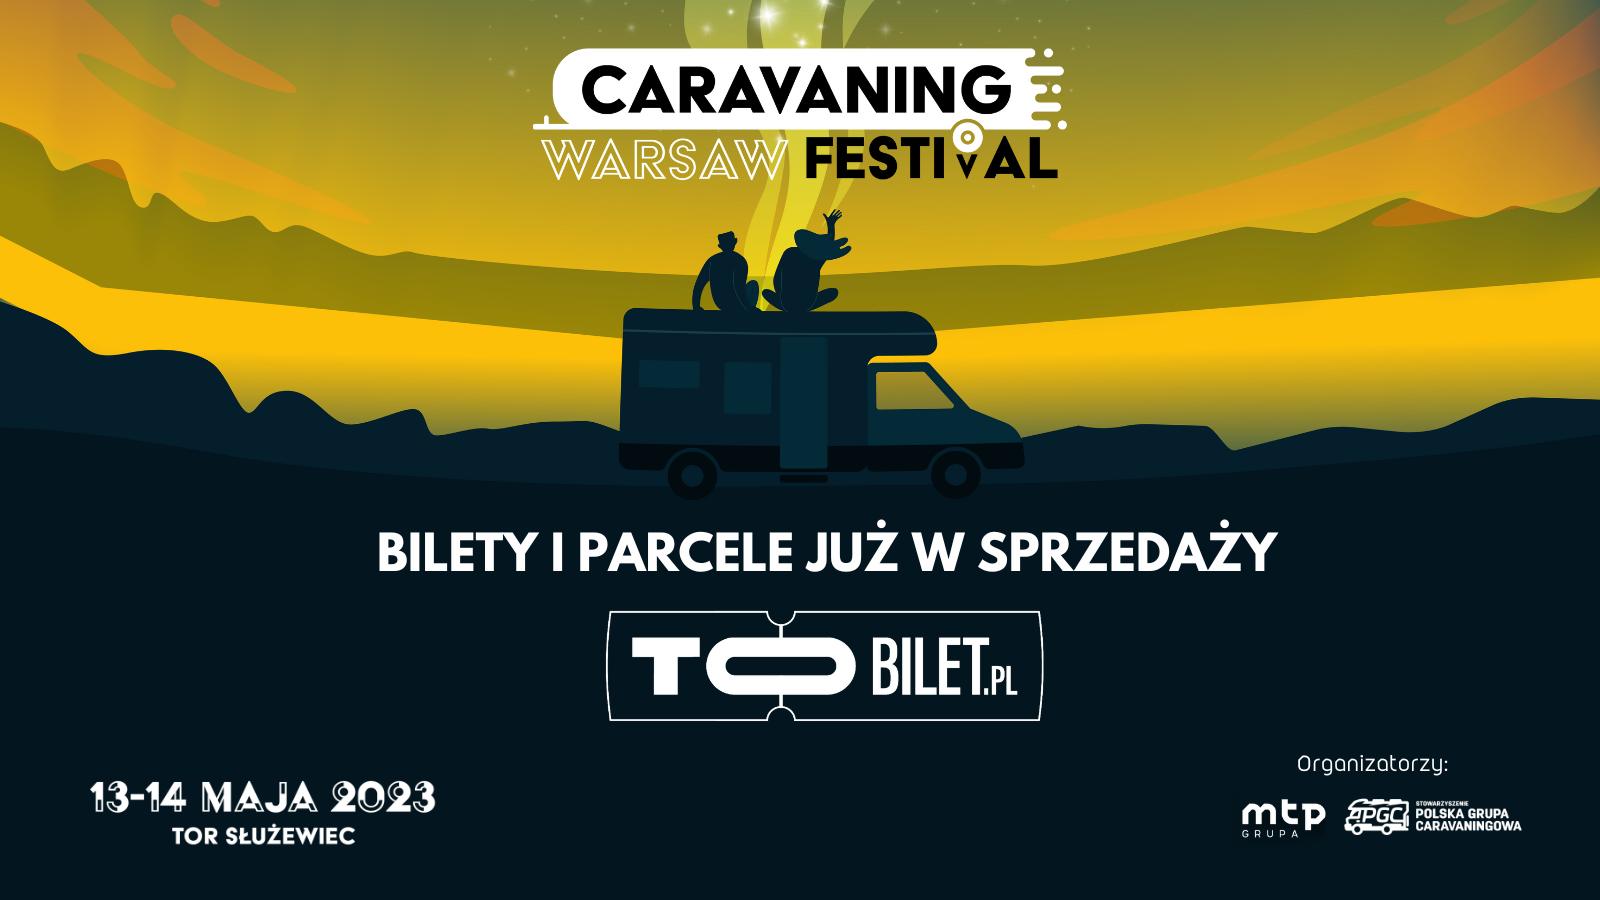 The sale of tickets and rally plots for the Warsaw Caravaning Festival has started – main image